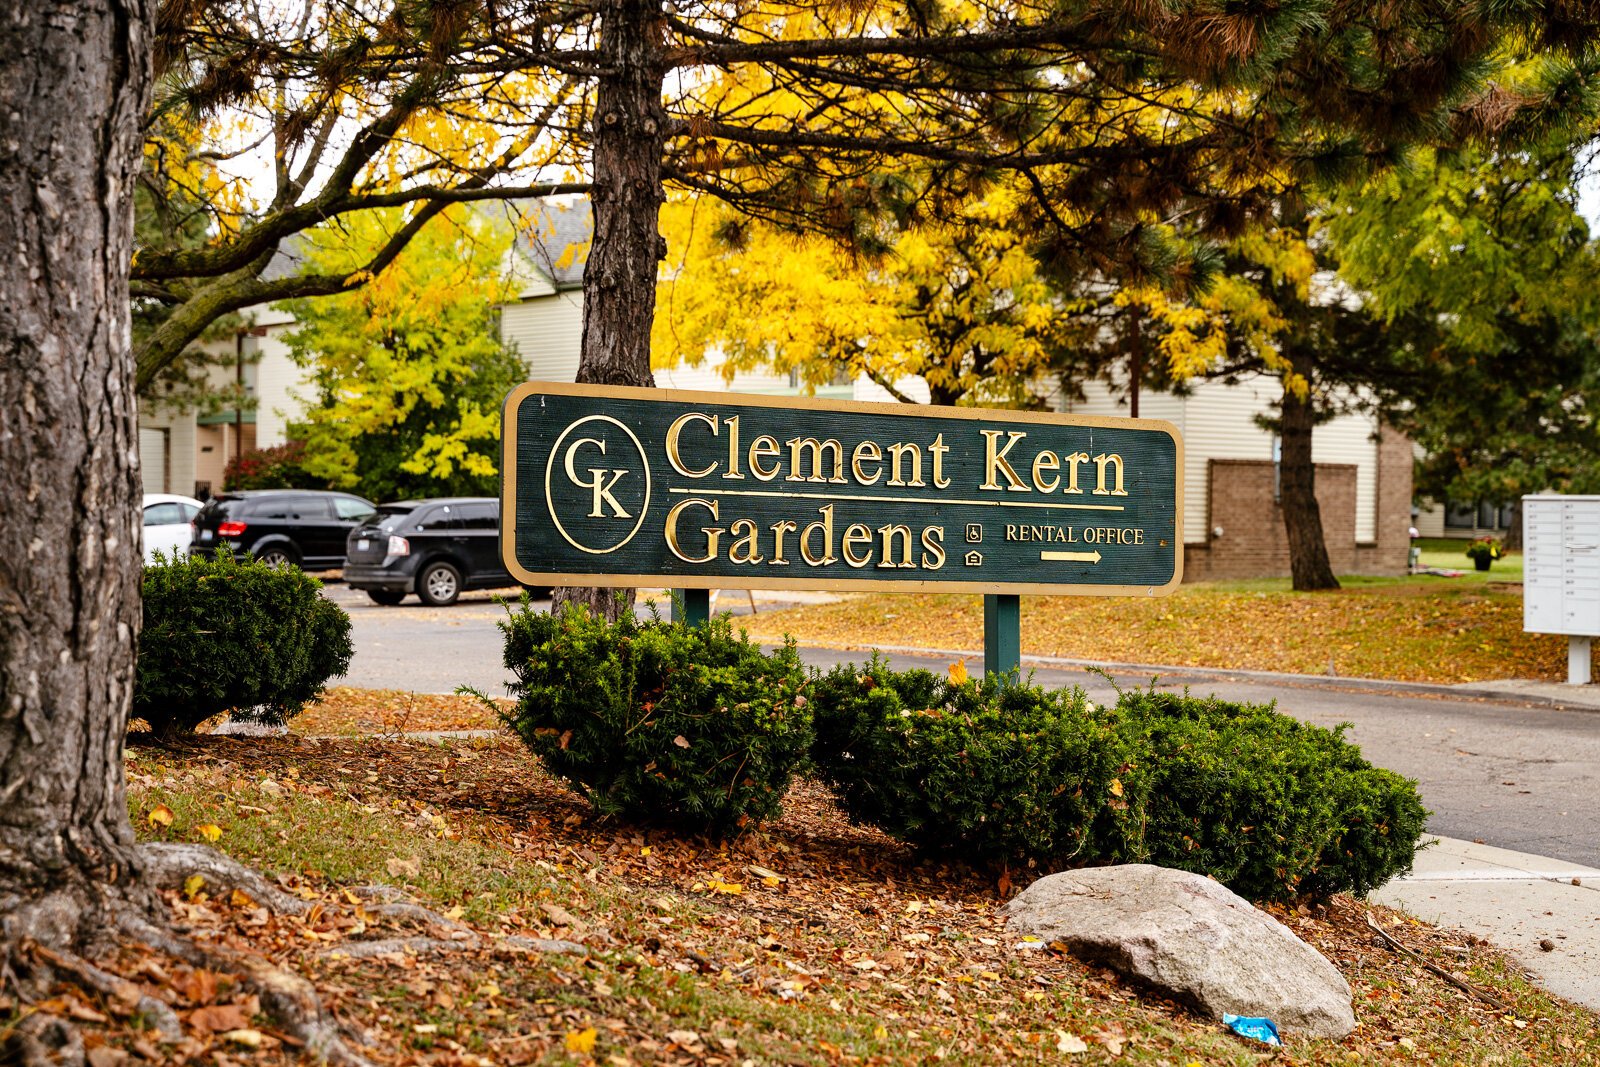 The redevelopment of Clement Kern Gardens is connected to the City of Detroit's larger vision for Greater Corktown and a program called the Choice Neighborhood Initiative (CNI).